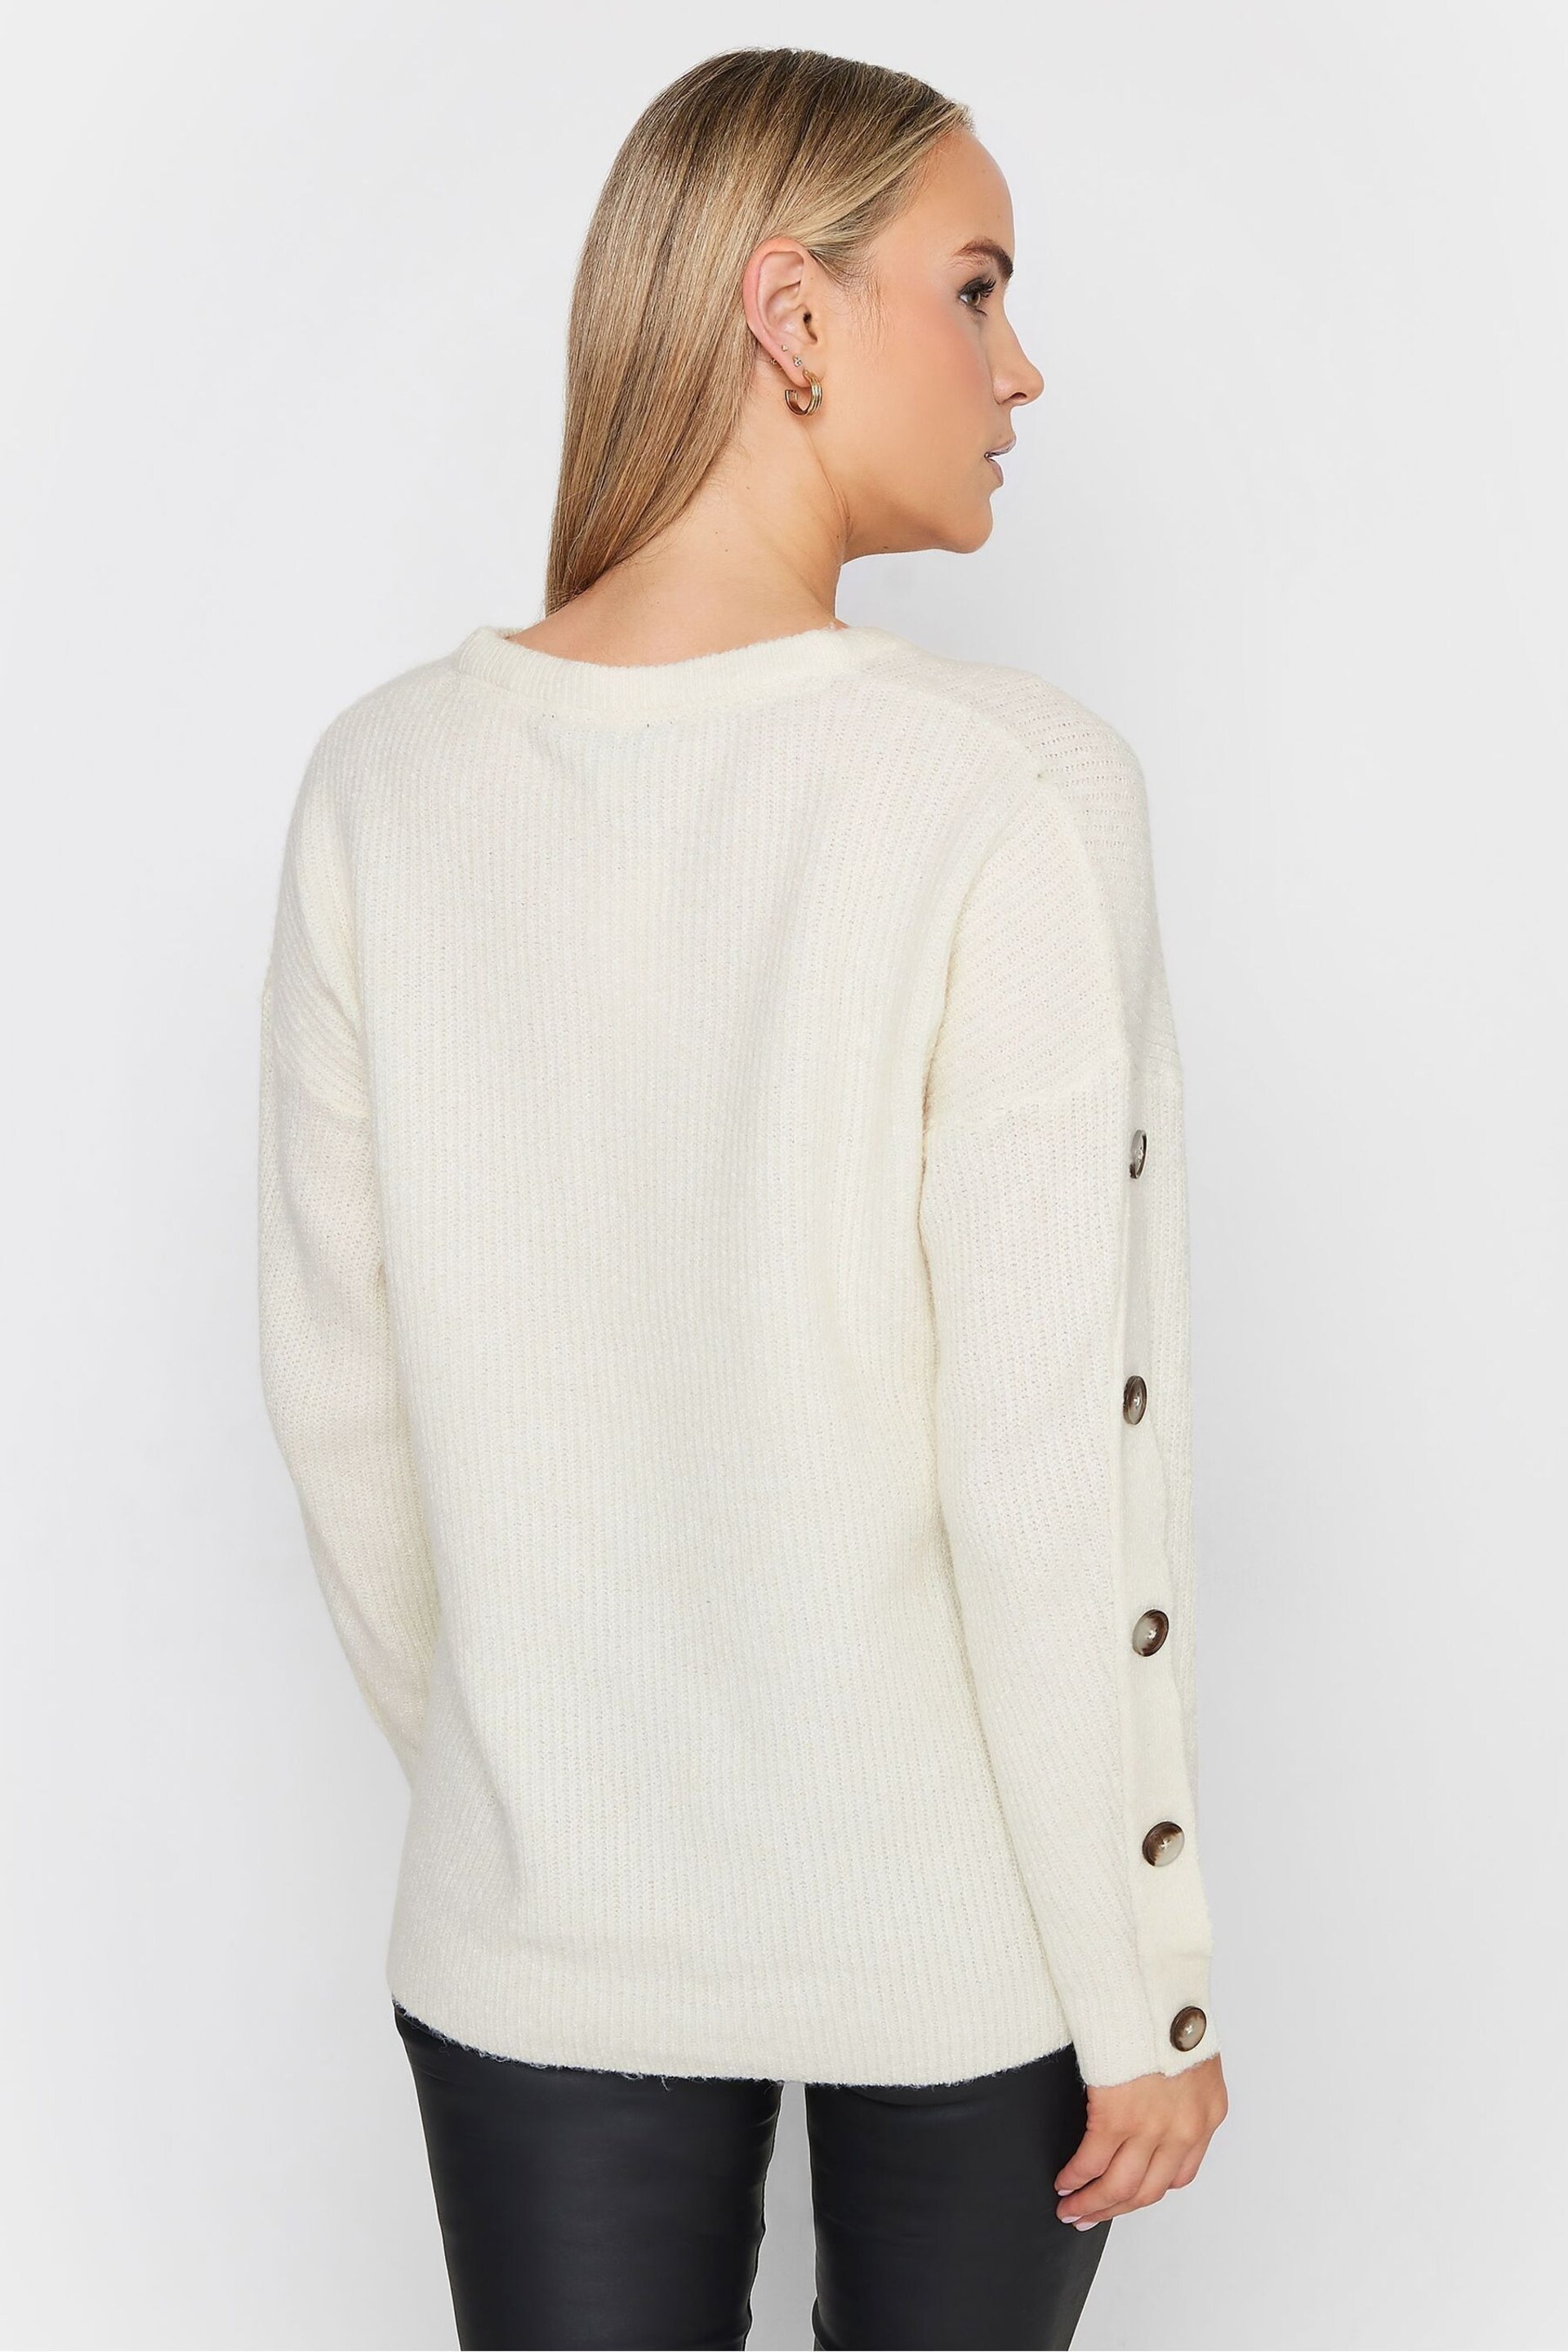 Long Tall Sally Cream Button Sleeve Jumper - Image 2 of 4